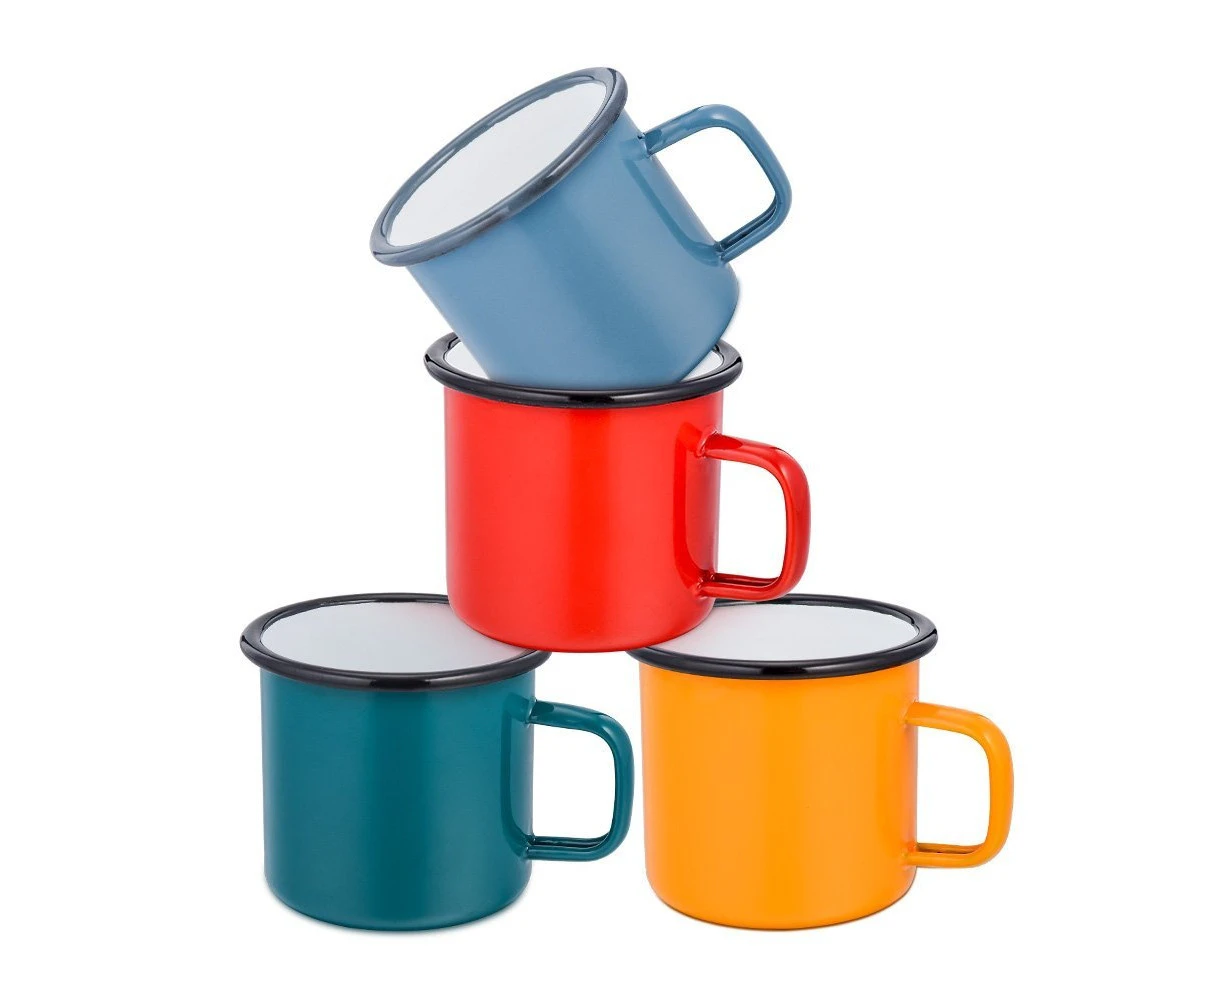 Enamel Camping Mug Set of 6, E-far 16 Ounce Colourful Metal Enamel Coffee Tea Cups Mugs for Camping Hiking Backpacking, 2-Sided Unique Graphic Design